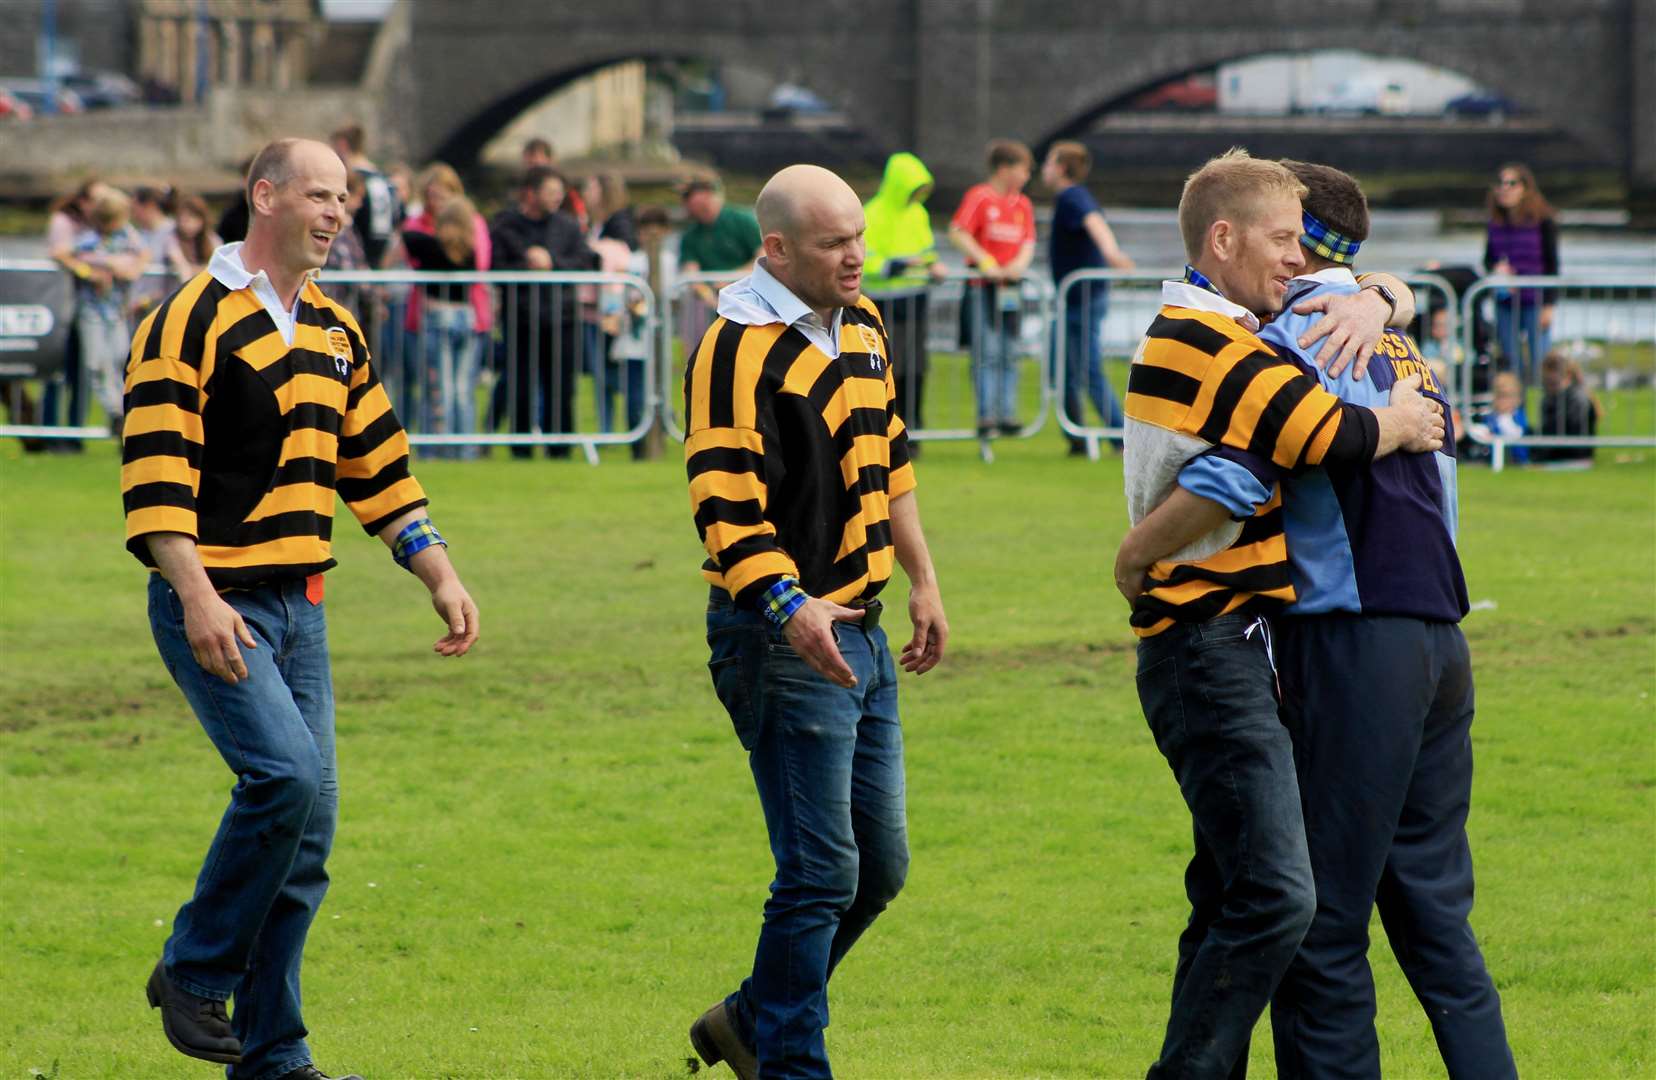 Halkirk's tug-of-war team (in yellow and black) defeated their Forss opponents after three pulls. Picture: Alan Hendry